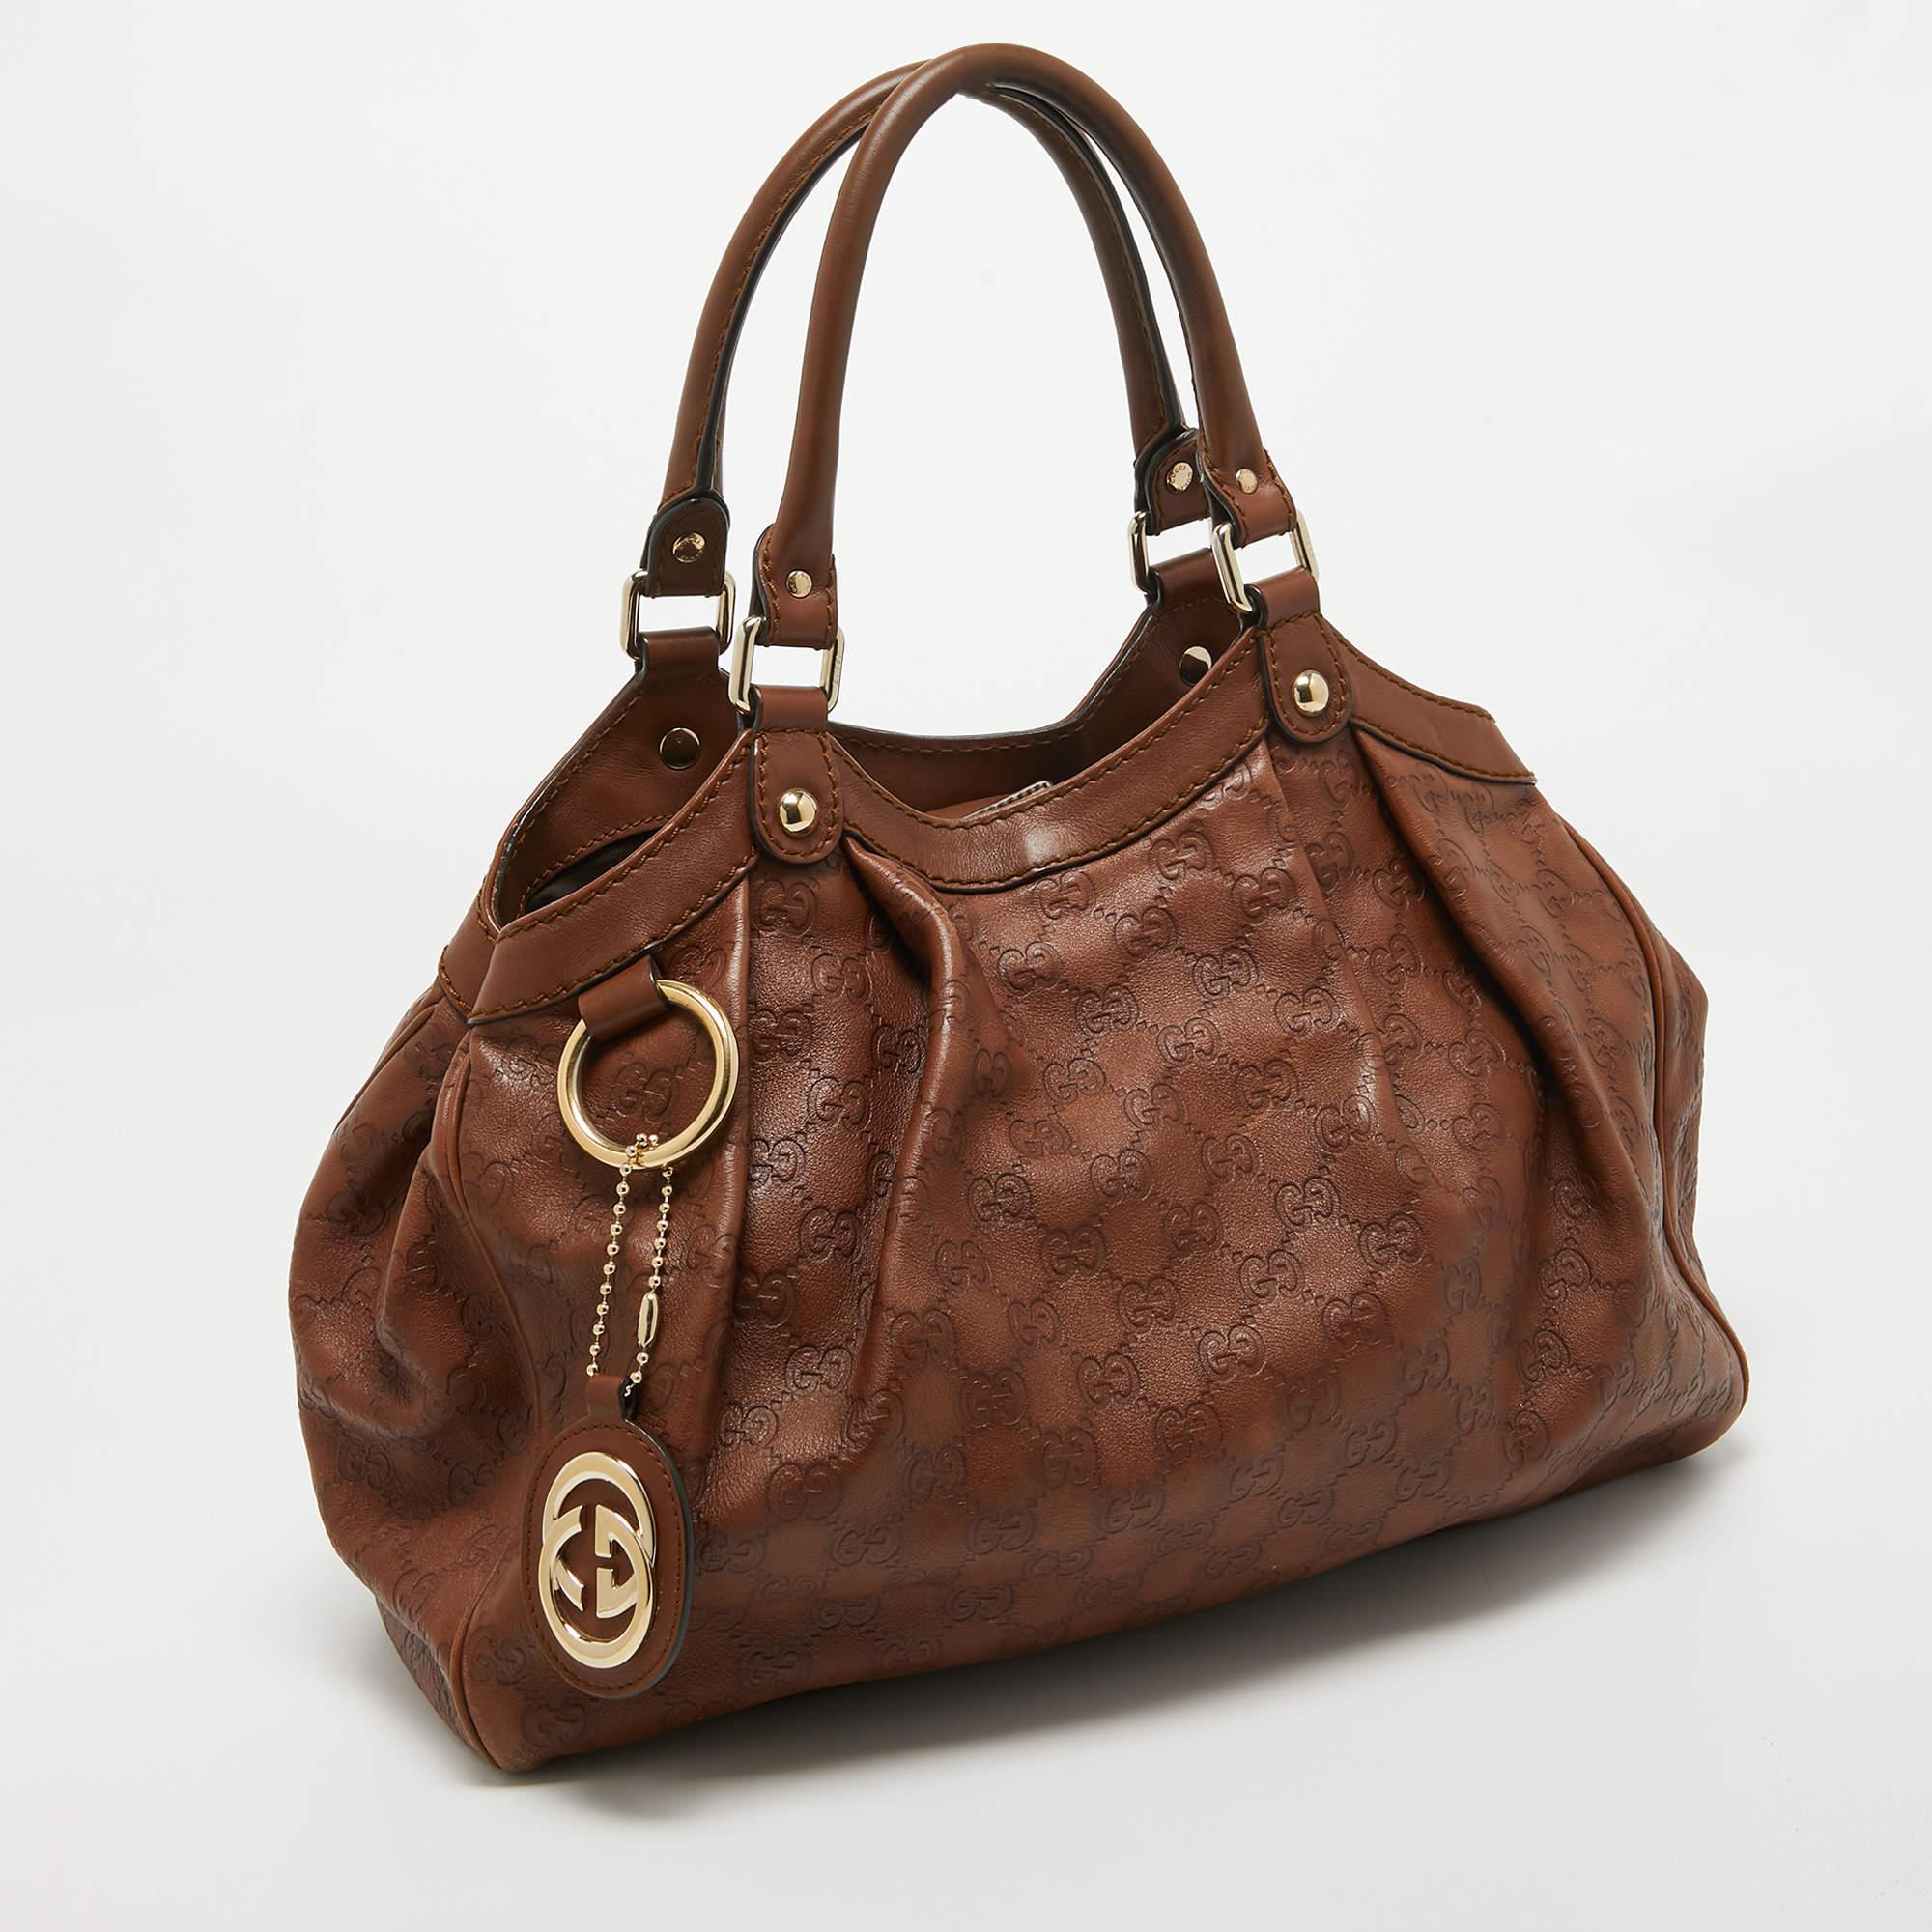 Enriched with signature details, this Sukey tote from Gucci will surely win your vote as a favorite. It comes crafted from Guccissima leather and flaunts dual handles at the top, a branded charm, and neat pleats. Lined with fabric, it is capable of